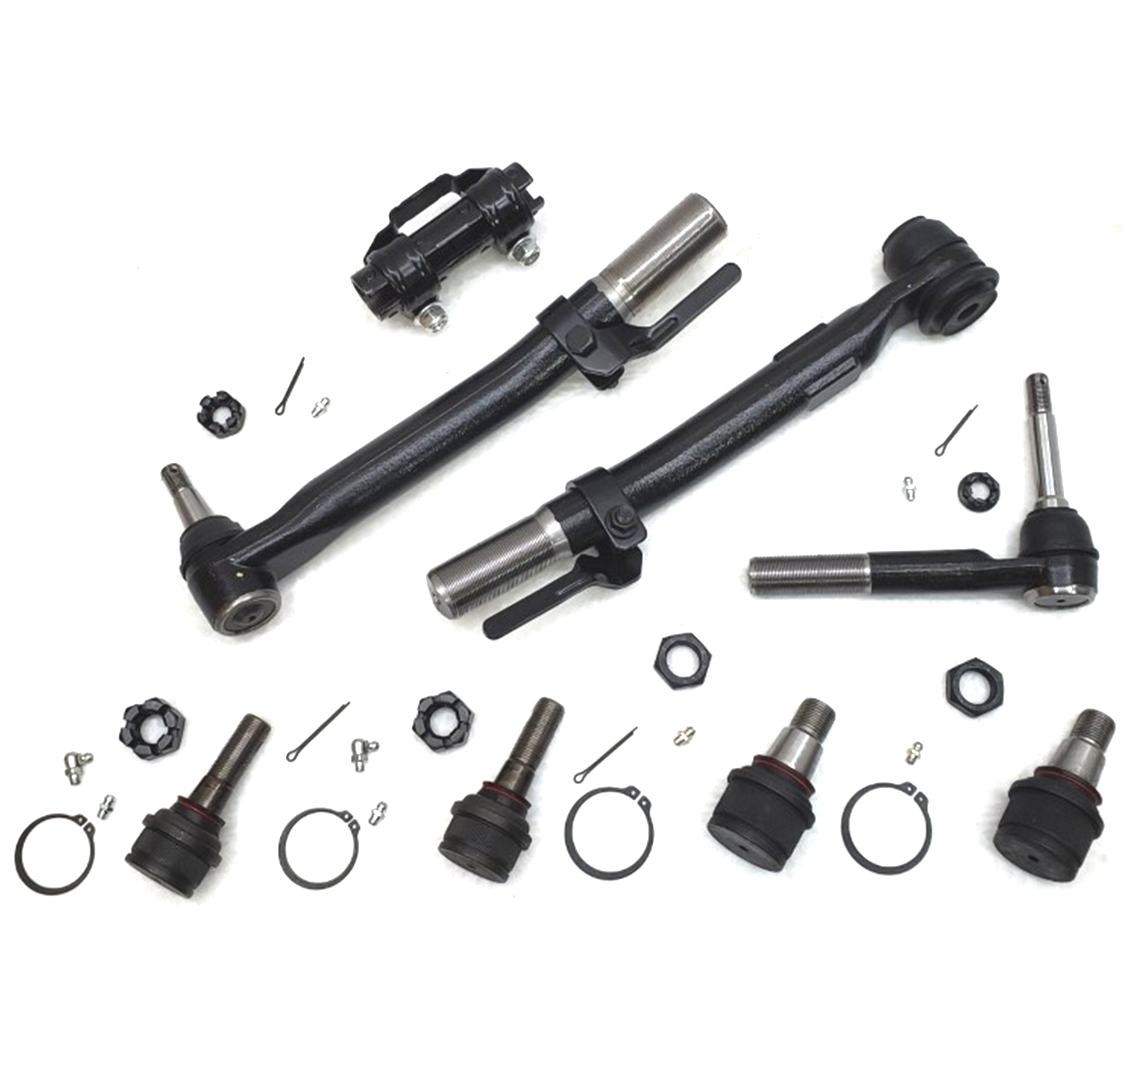 Lifetime Auto Parts Ball Joint & Tie Rod Kit for 2017-2019 Ford F250 & F350 Super Duty 4x4 Wide Frame